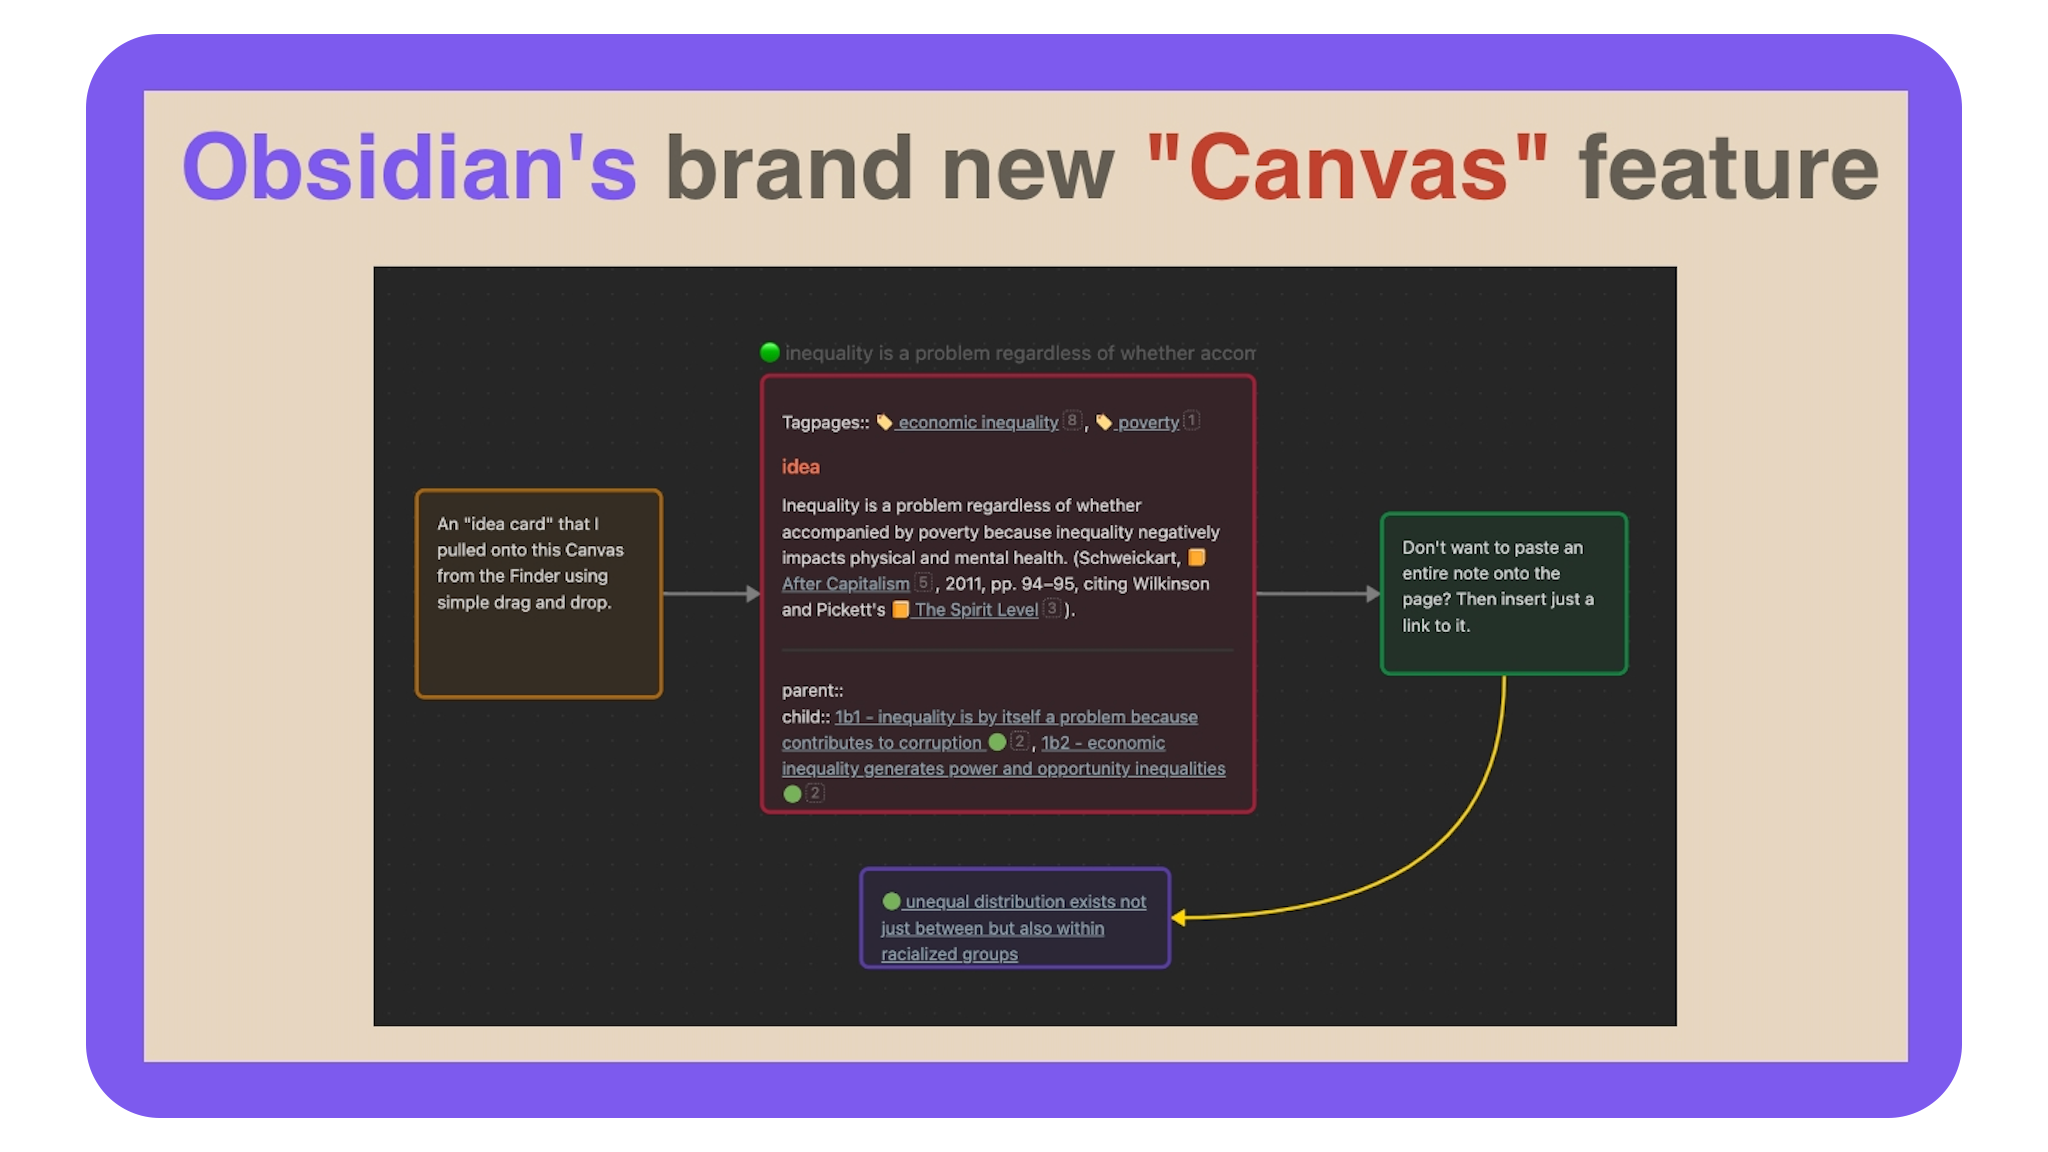 Obsidian's brand new "Canvas" feature 📽